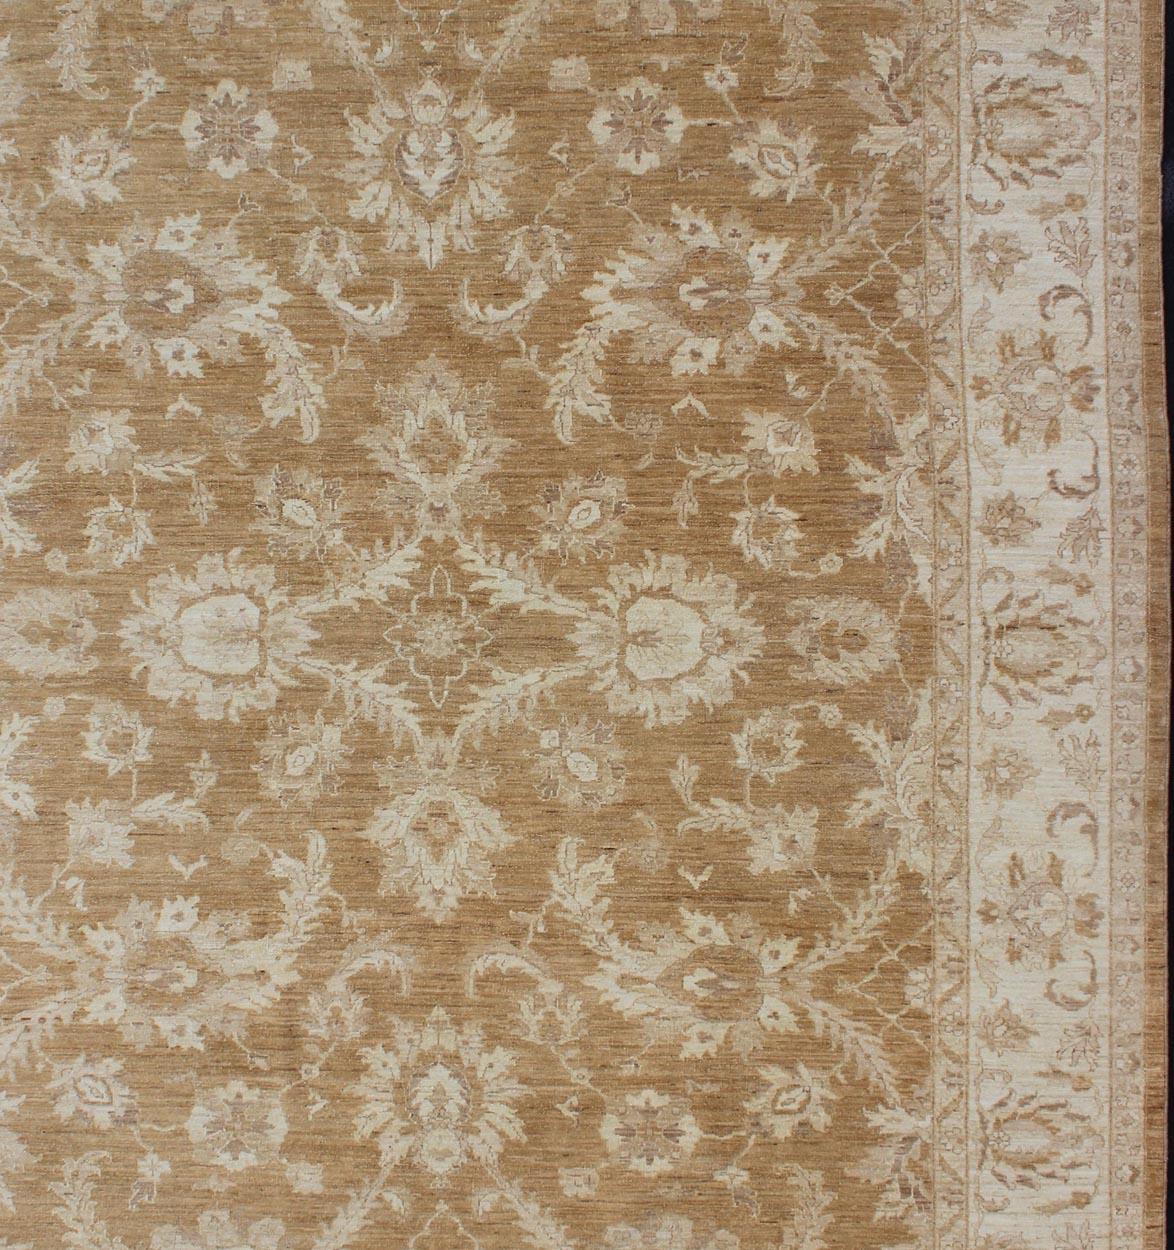 Tabriz Sultanabad Design Afghan Made Floral Pattern in Earth Tones with Light Caramel For Sale